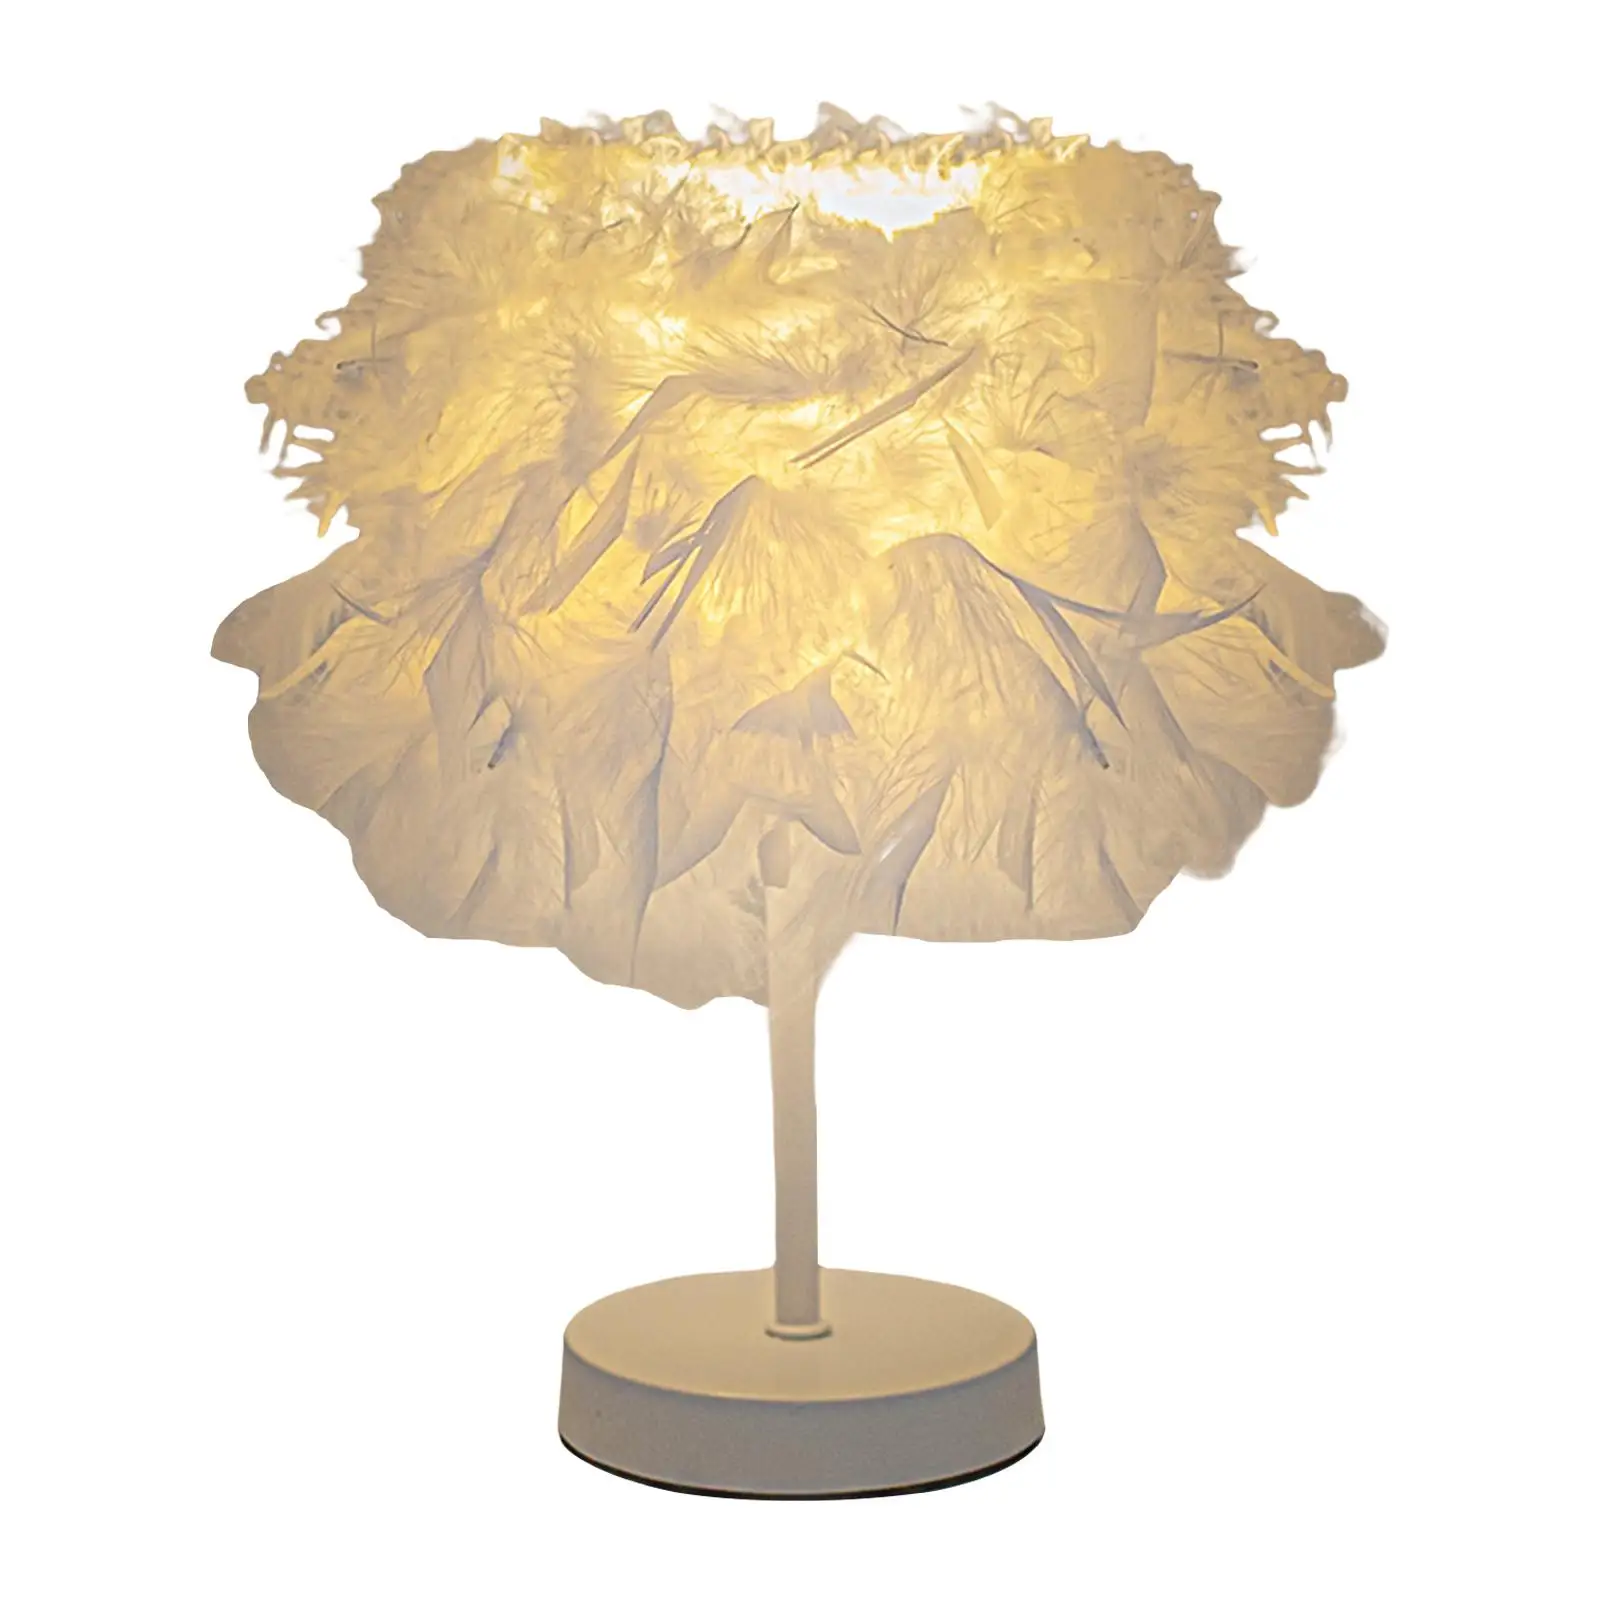 Romantic Feathers Table Lamp Decor Lantern Night Lights Desk Light for Guest Room Bedroom Wedding New Year Party